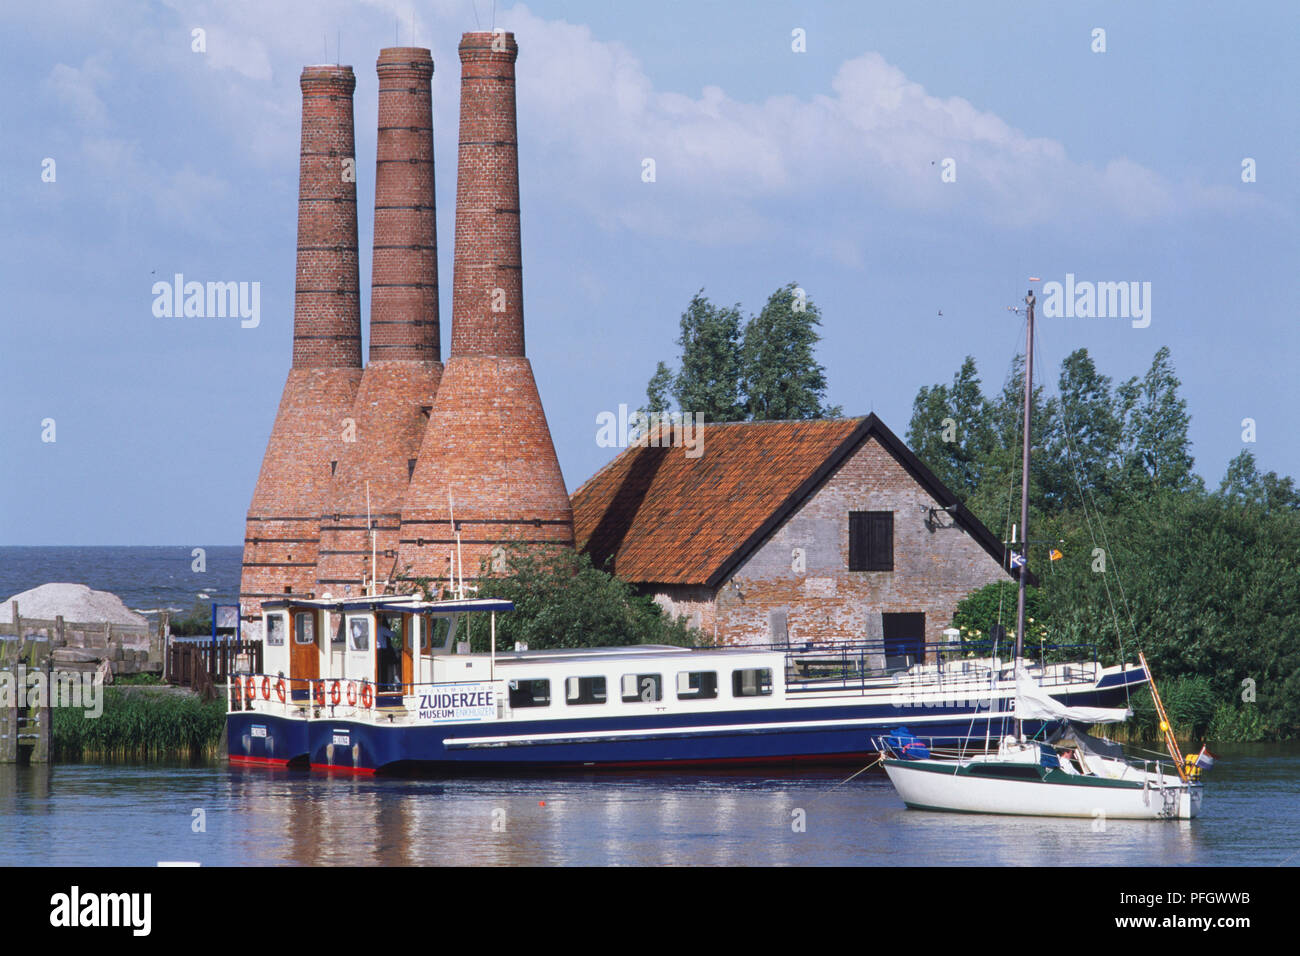 Holland, Zuiderzee Museum, bottle shaped lime kilns in the background with a canal and boats in the foreground. Stock Photo